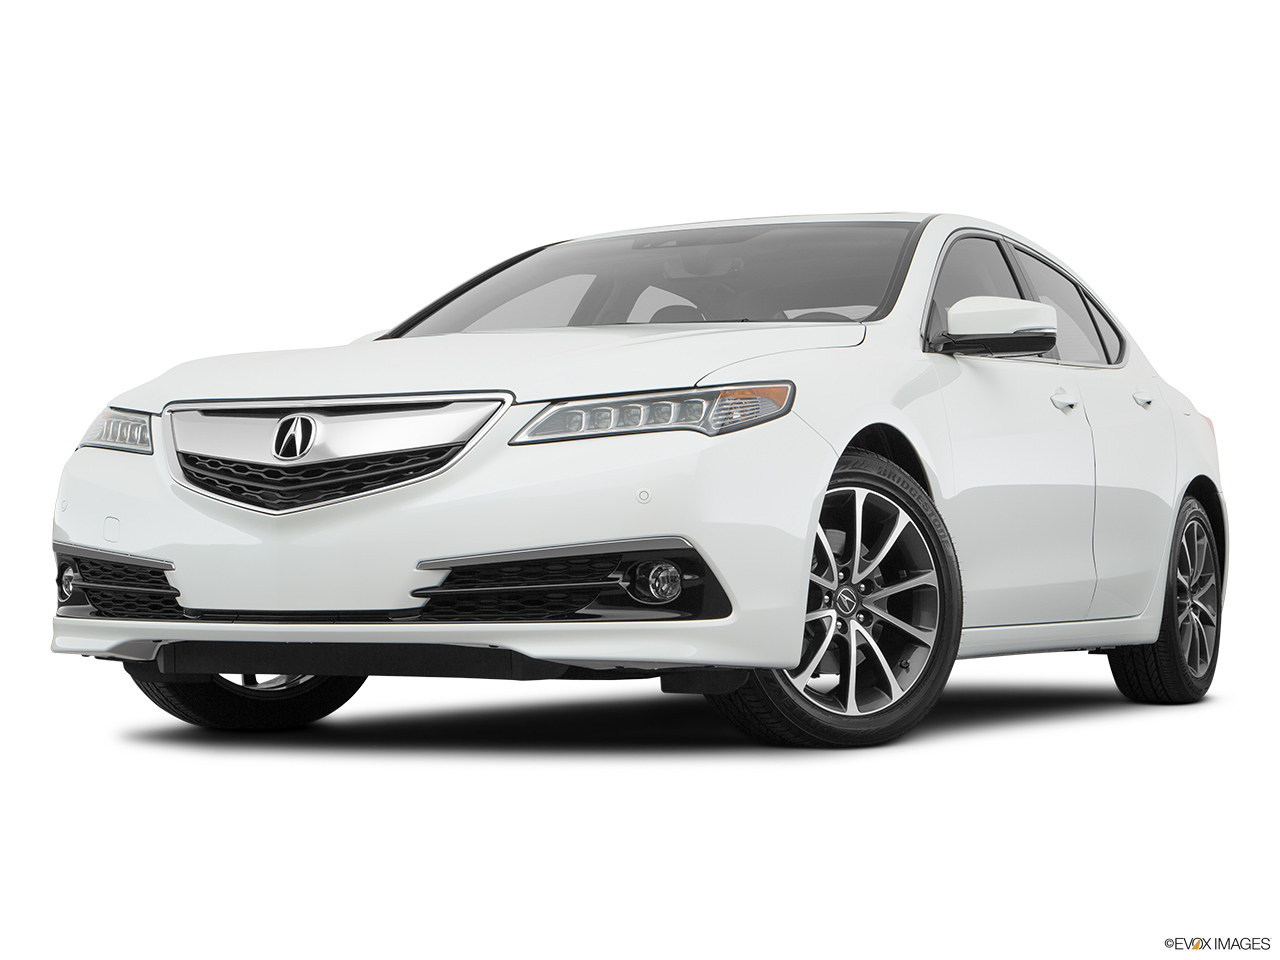 2017 Acura TLX 3.5L Front angle view, low wide perspective. 